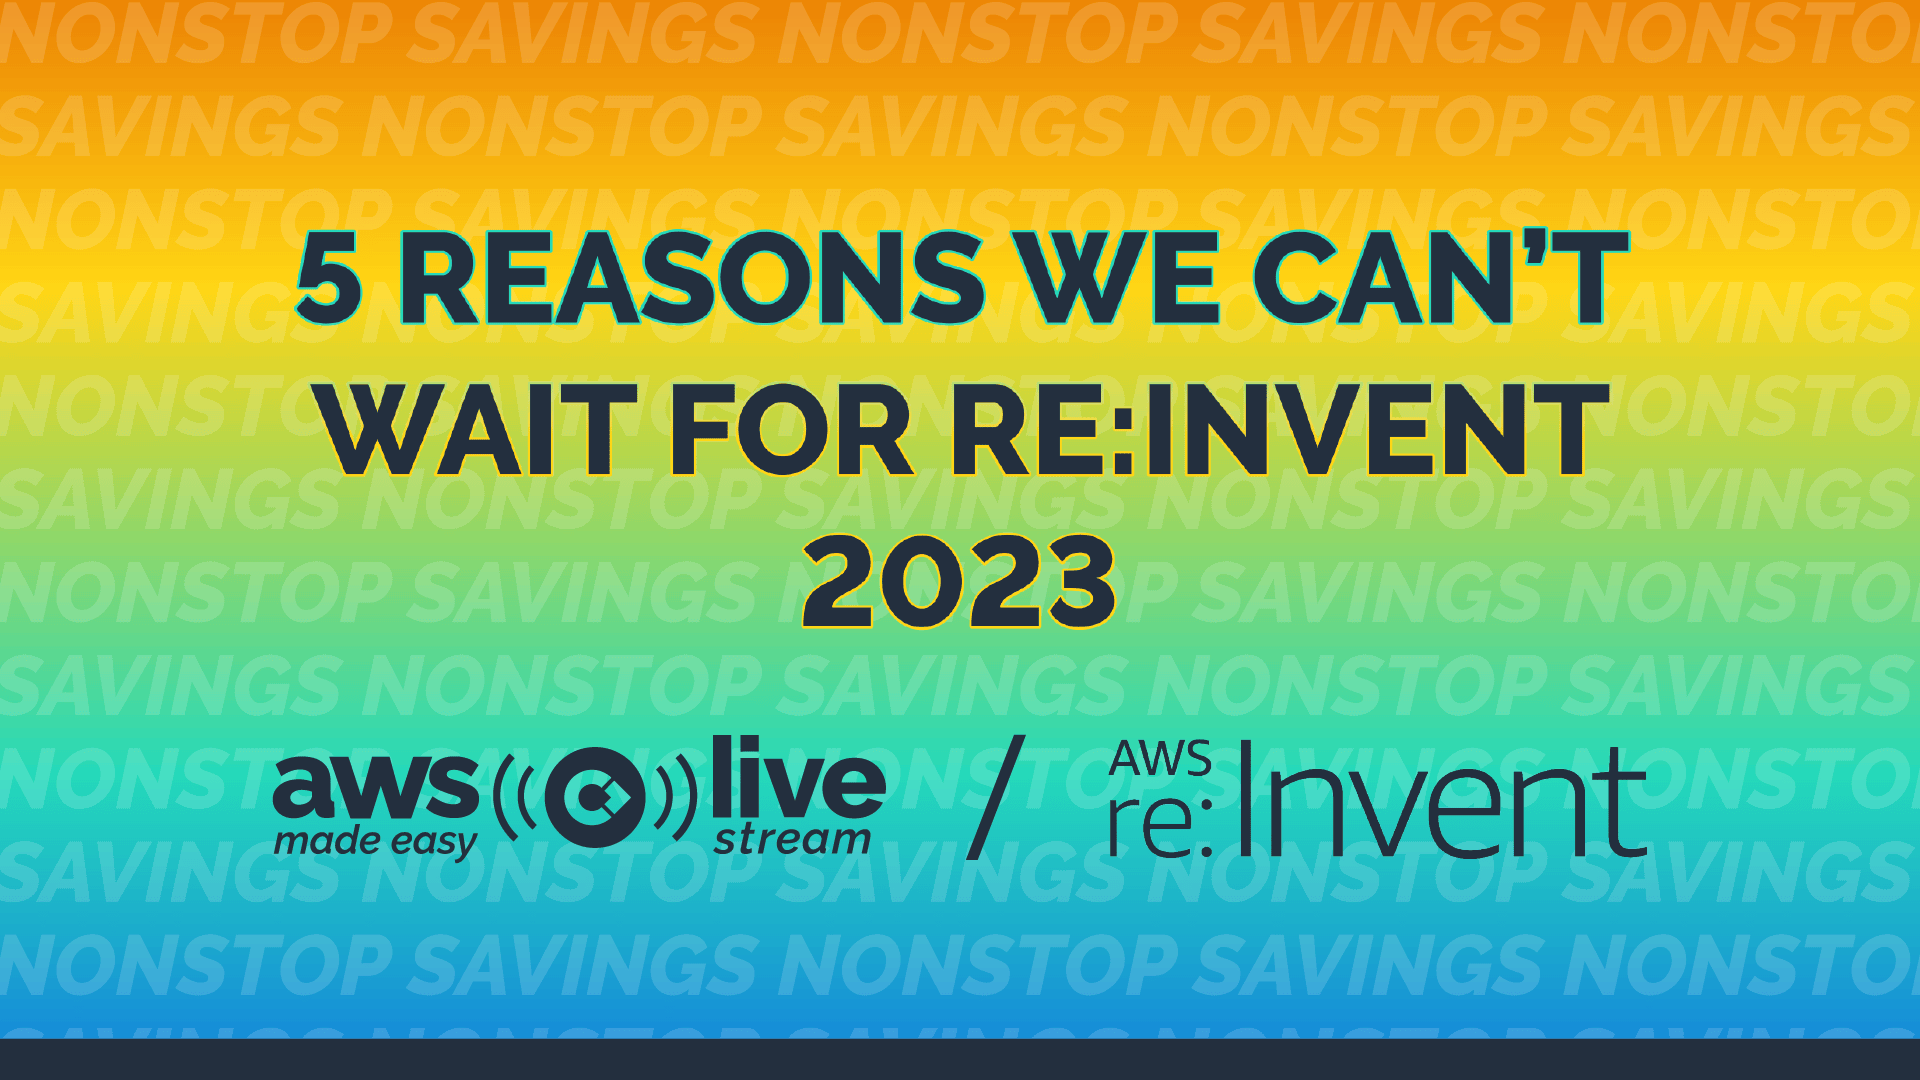 5 reasons we can’t wait for AWS re:Invent 2023